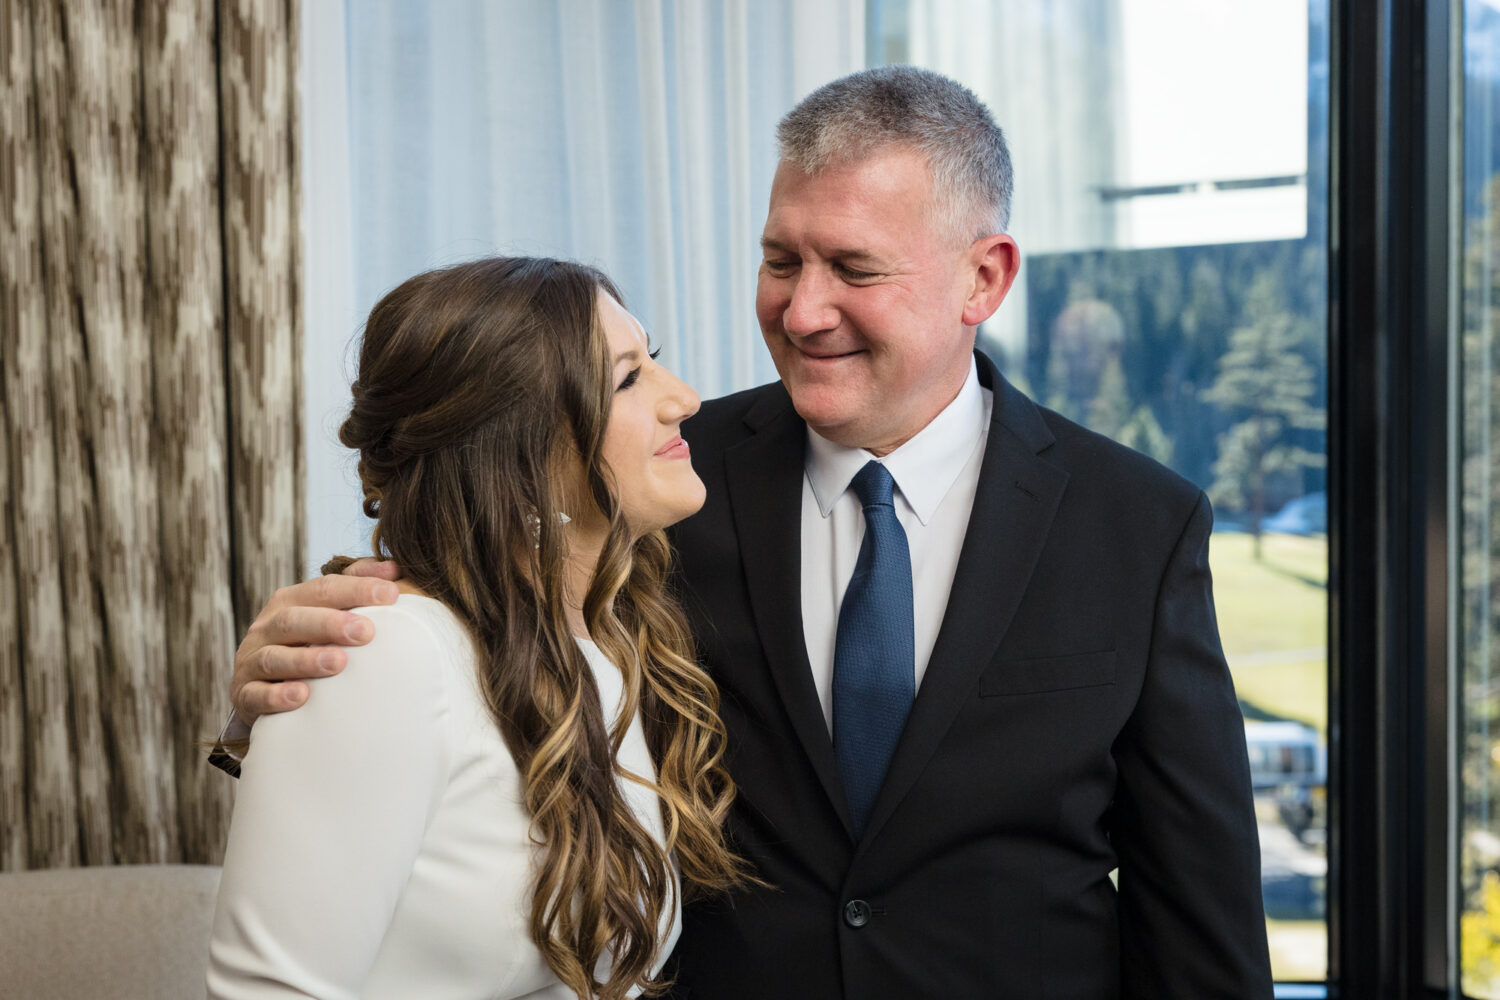 The bride and her dad enjoy an emotional moment during their father and daughter wedding day first look.